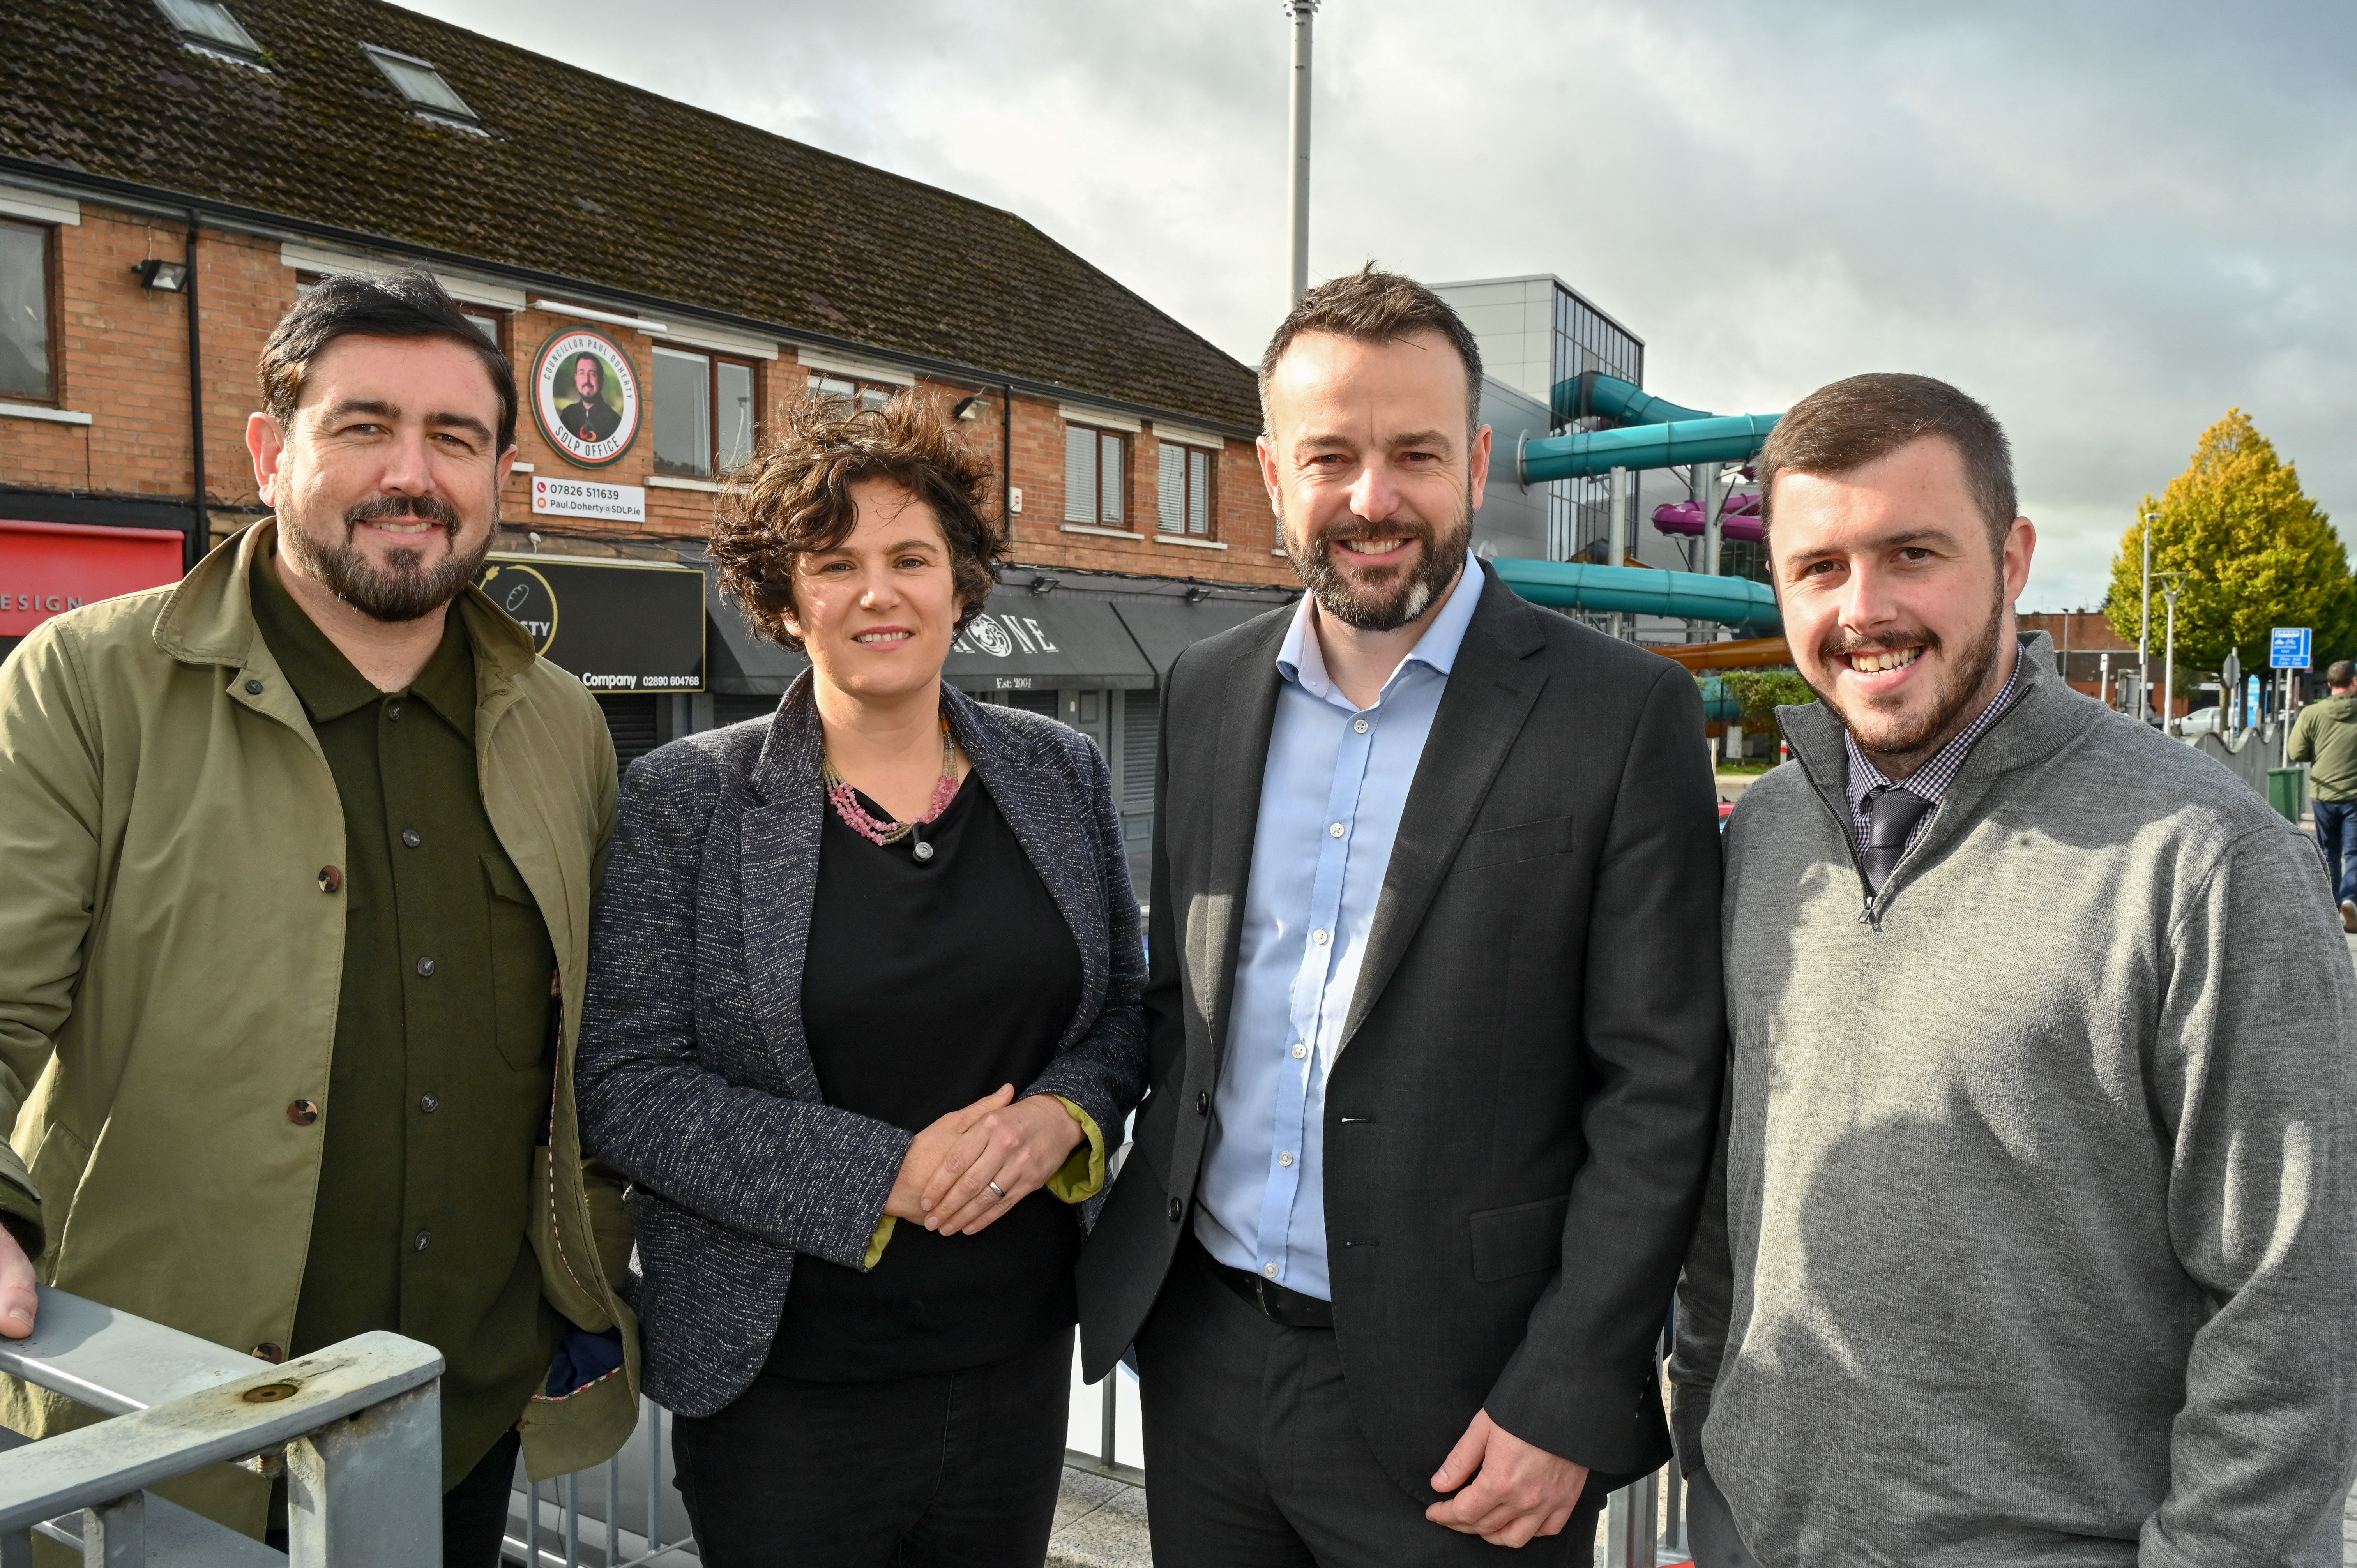 TOGETHER: Cllr Paul Doherty, left, Claire Hanna MP, Colum Eastwood MP and Gerard McDonald